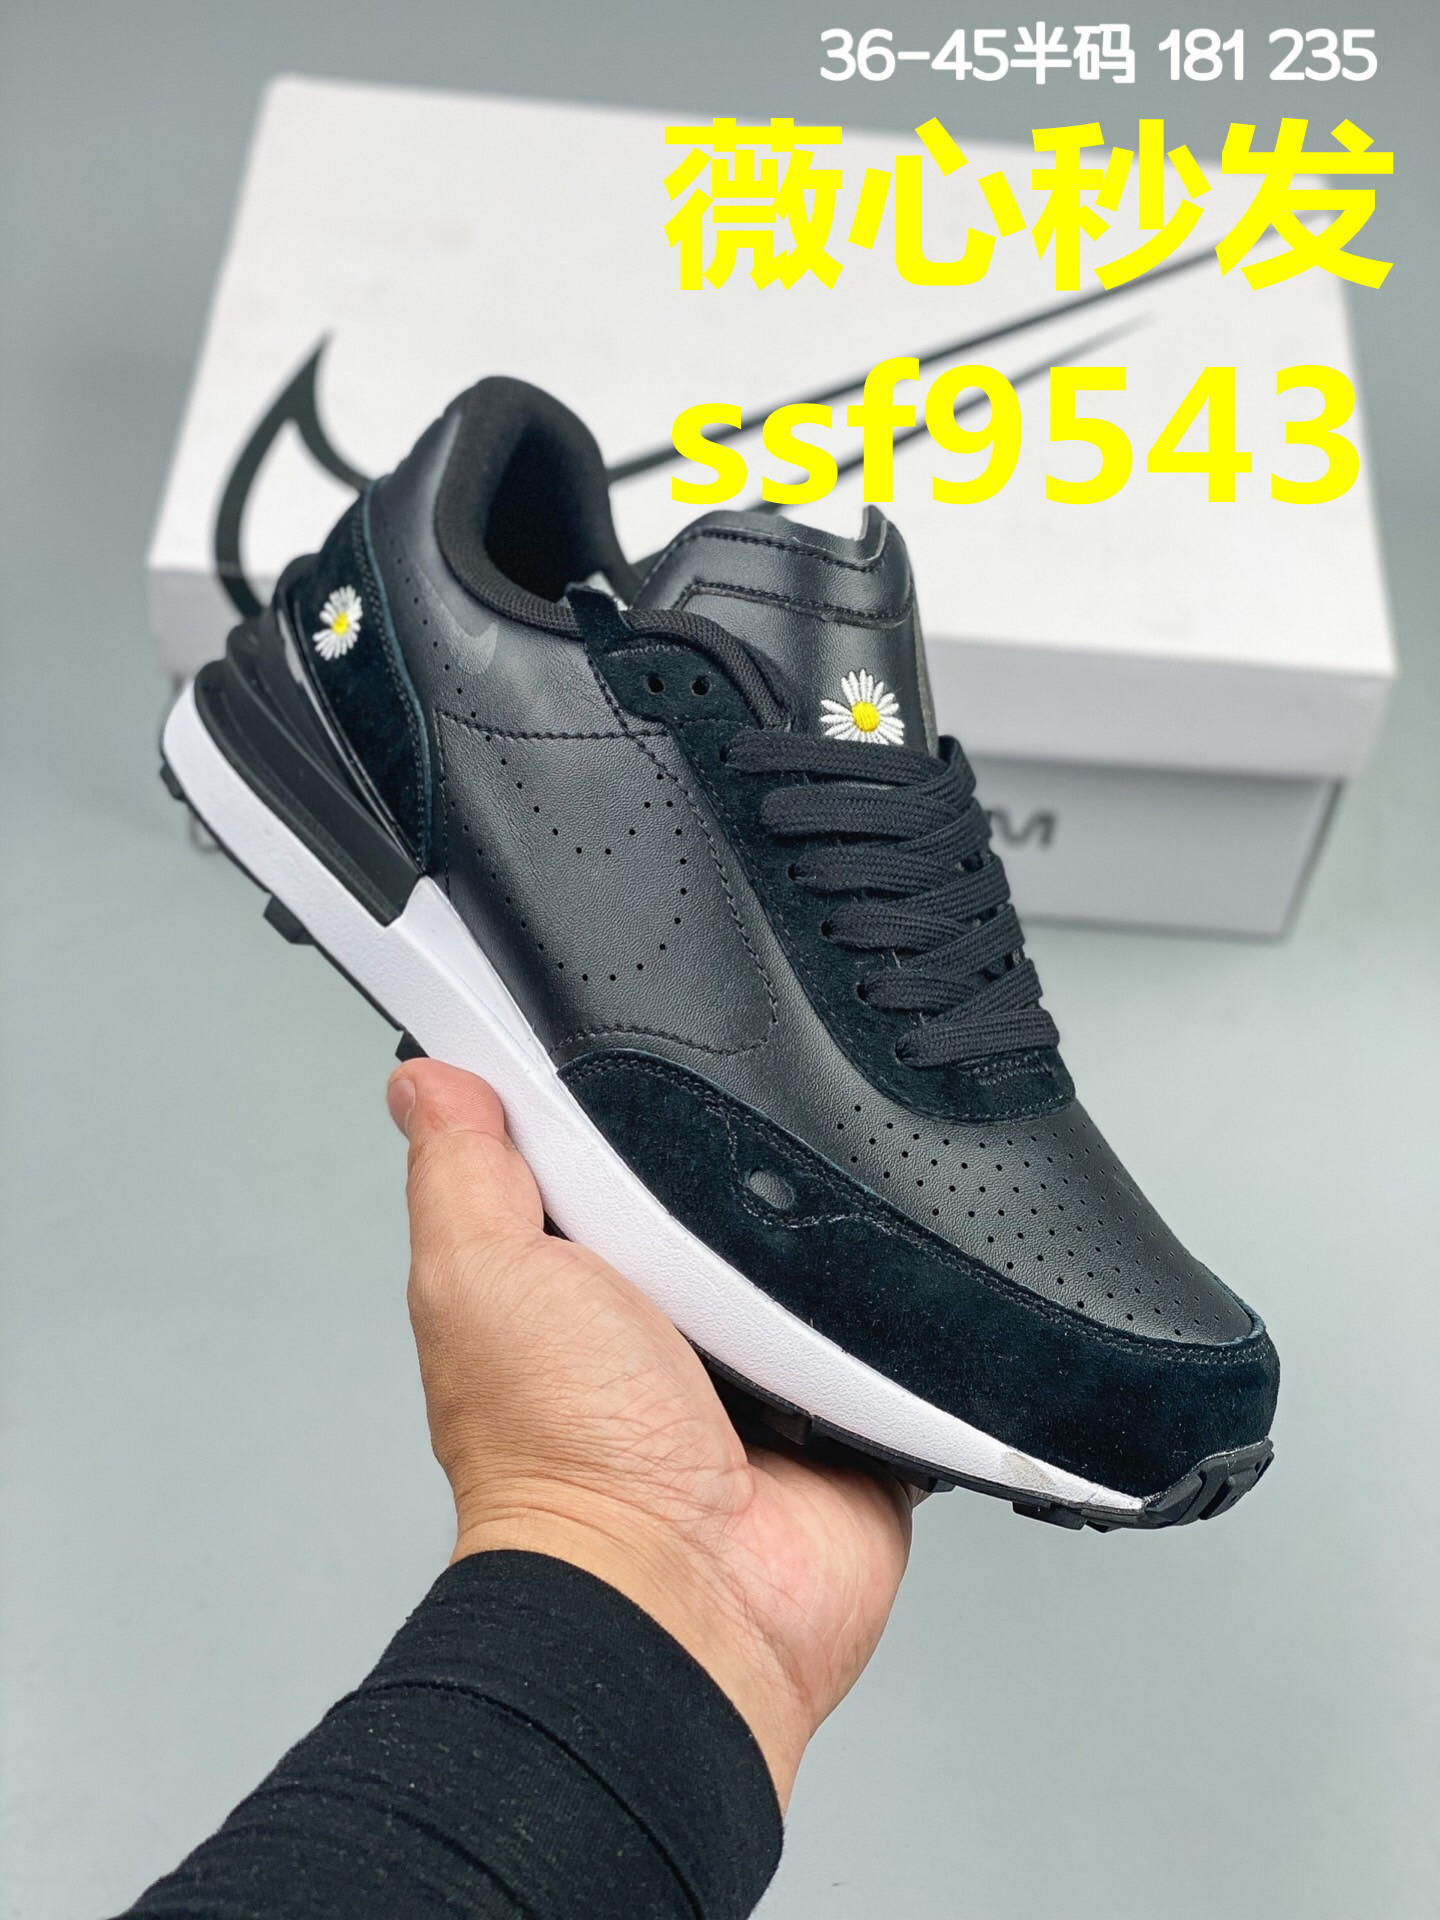 Cyan2020 winter new pattern Olive green Men's Shoes Women's Shoes Star of the same style black and white Mesh surface Casual shoes Low Gang non-slip Rain shoes